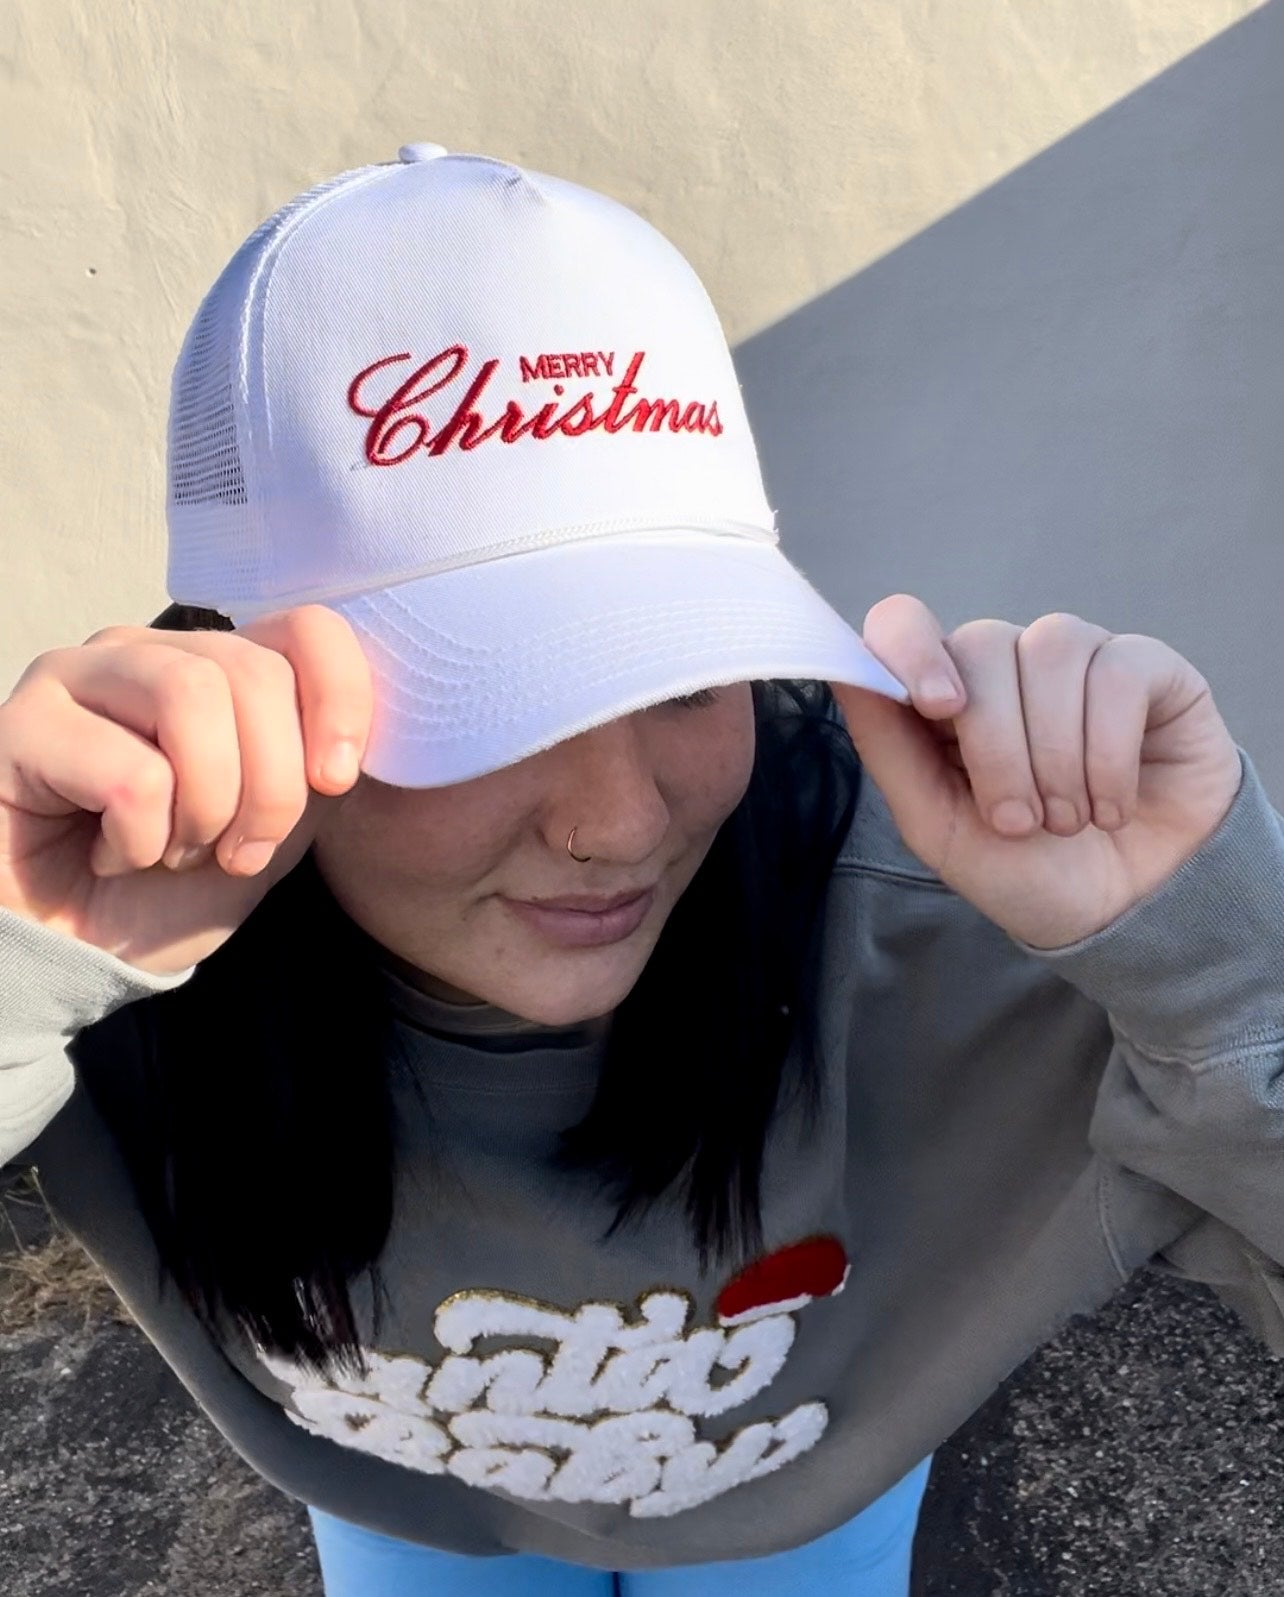 Merry Christmas Embroidered Trucker Hat